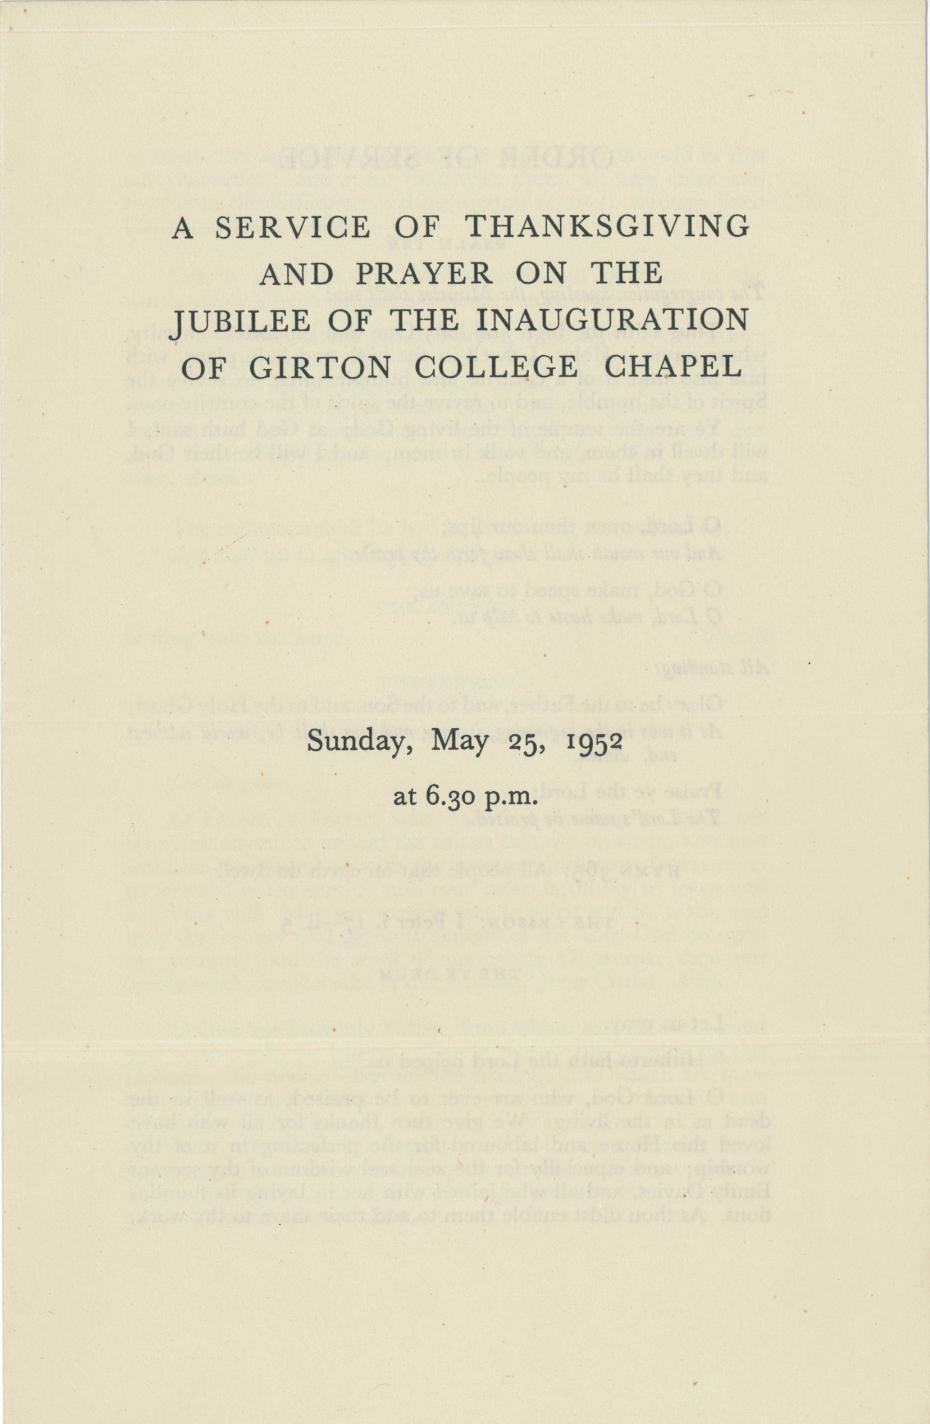 Order of service for the jubilee of the inauguration of the College Chapel, 25 May 1952 (archive reference: GCAR 6/4/3).